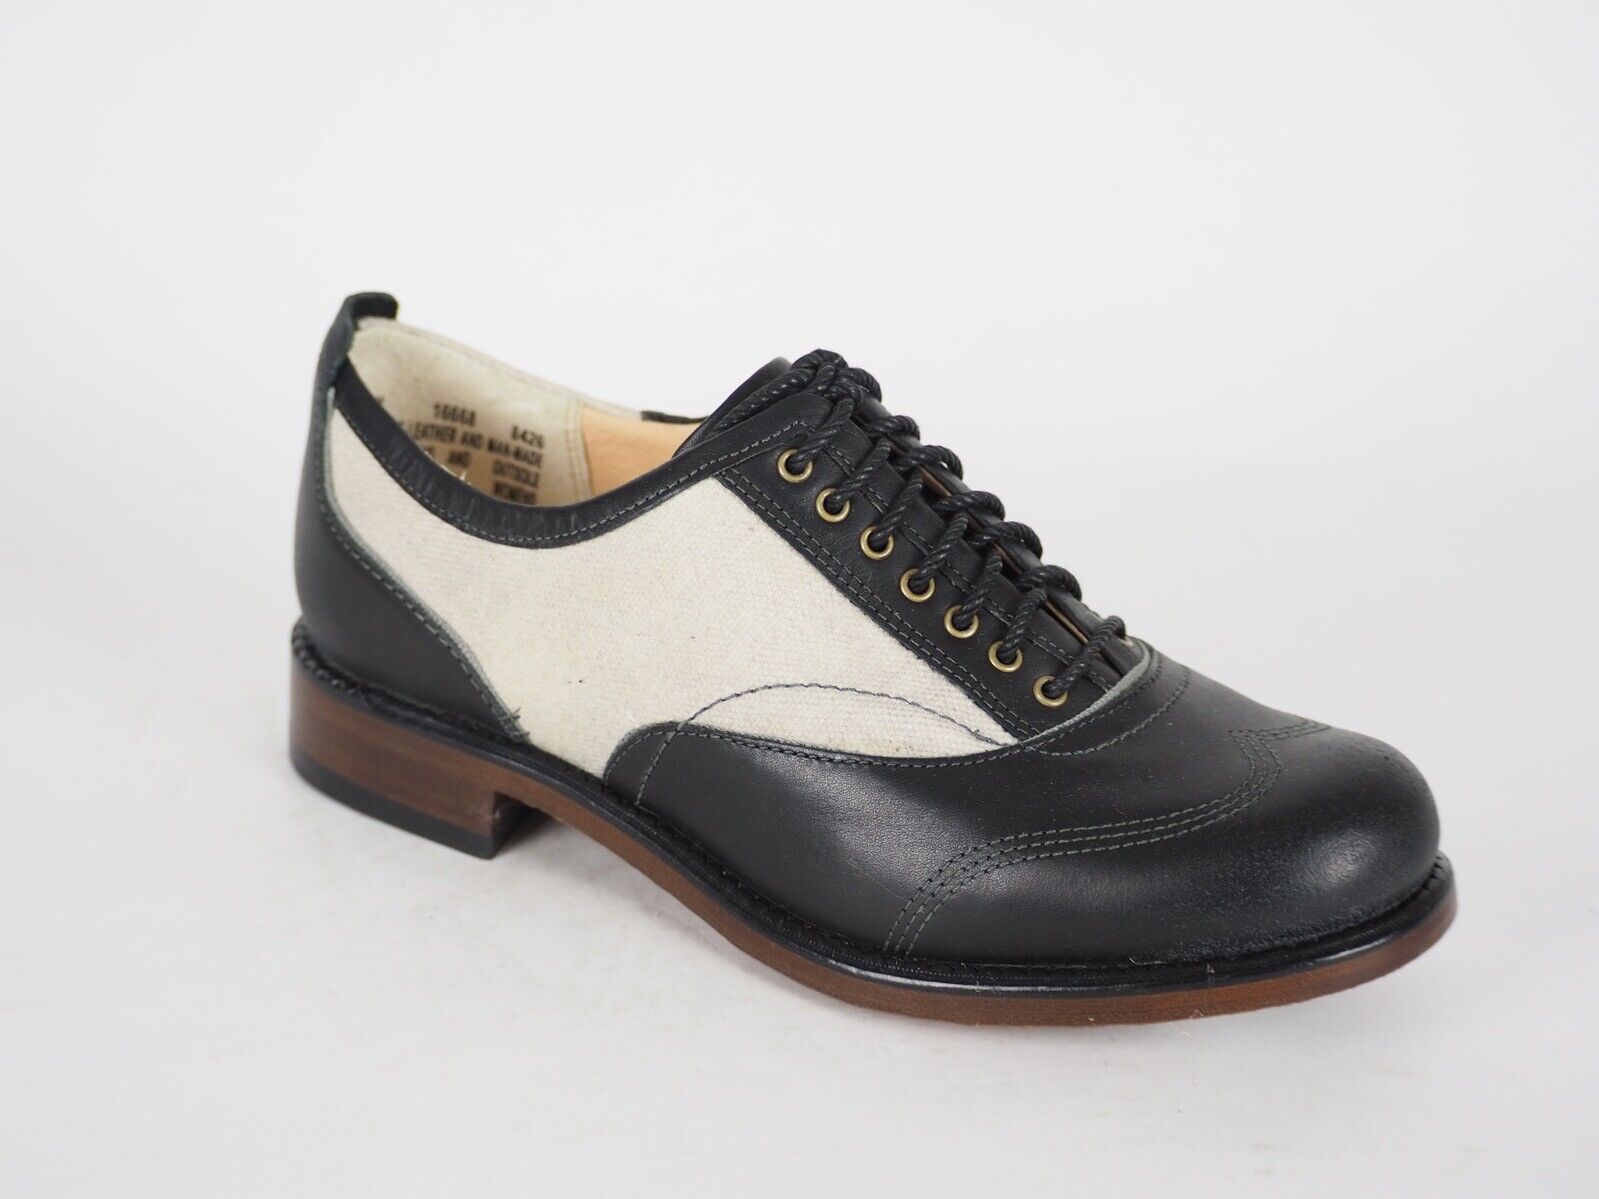 Womens Timberland Lucille 16668 Black Leather Fabric Lace Up Oxford Shoes - London Top Style